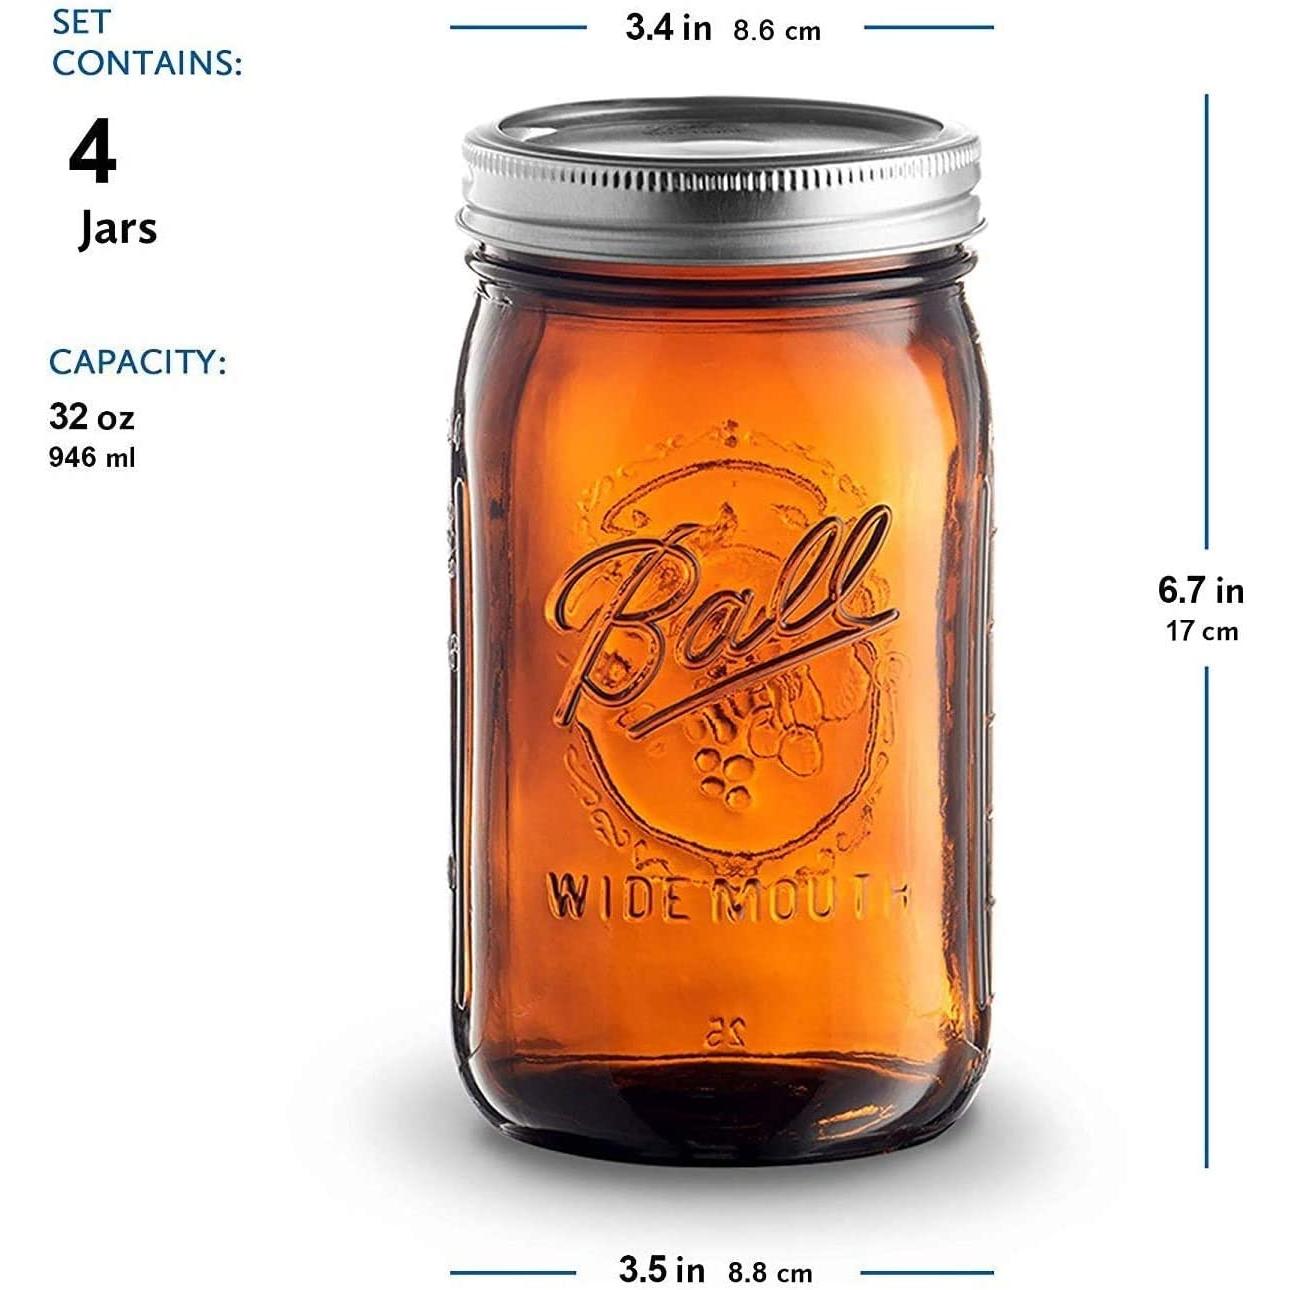 Ball Amber Glass Wide Mouth Mason Jars (32 oz/ Quart ) 12 Pack. With Airtight lids and Bands - Amber Canning Jar - UV light Protection - Microwave &#x26; Dishwasher Safe.